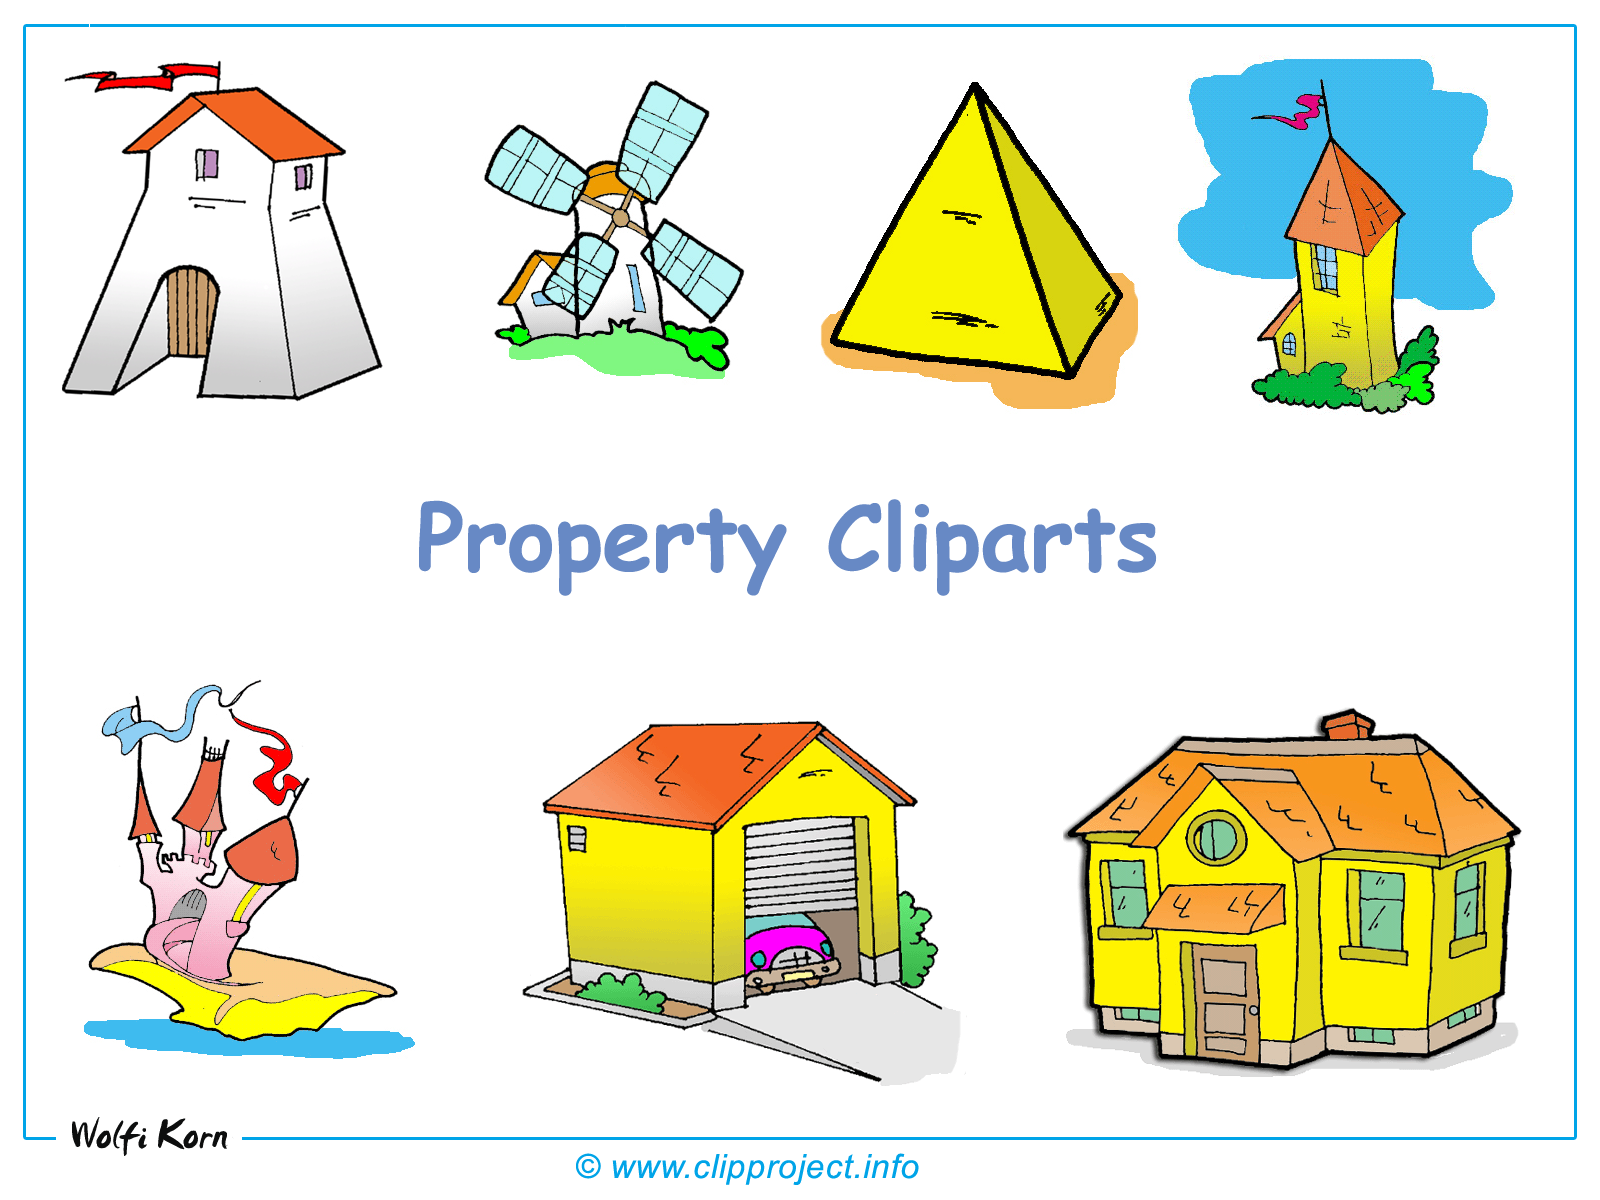 Clipart Images Free Download.